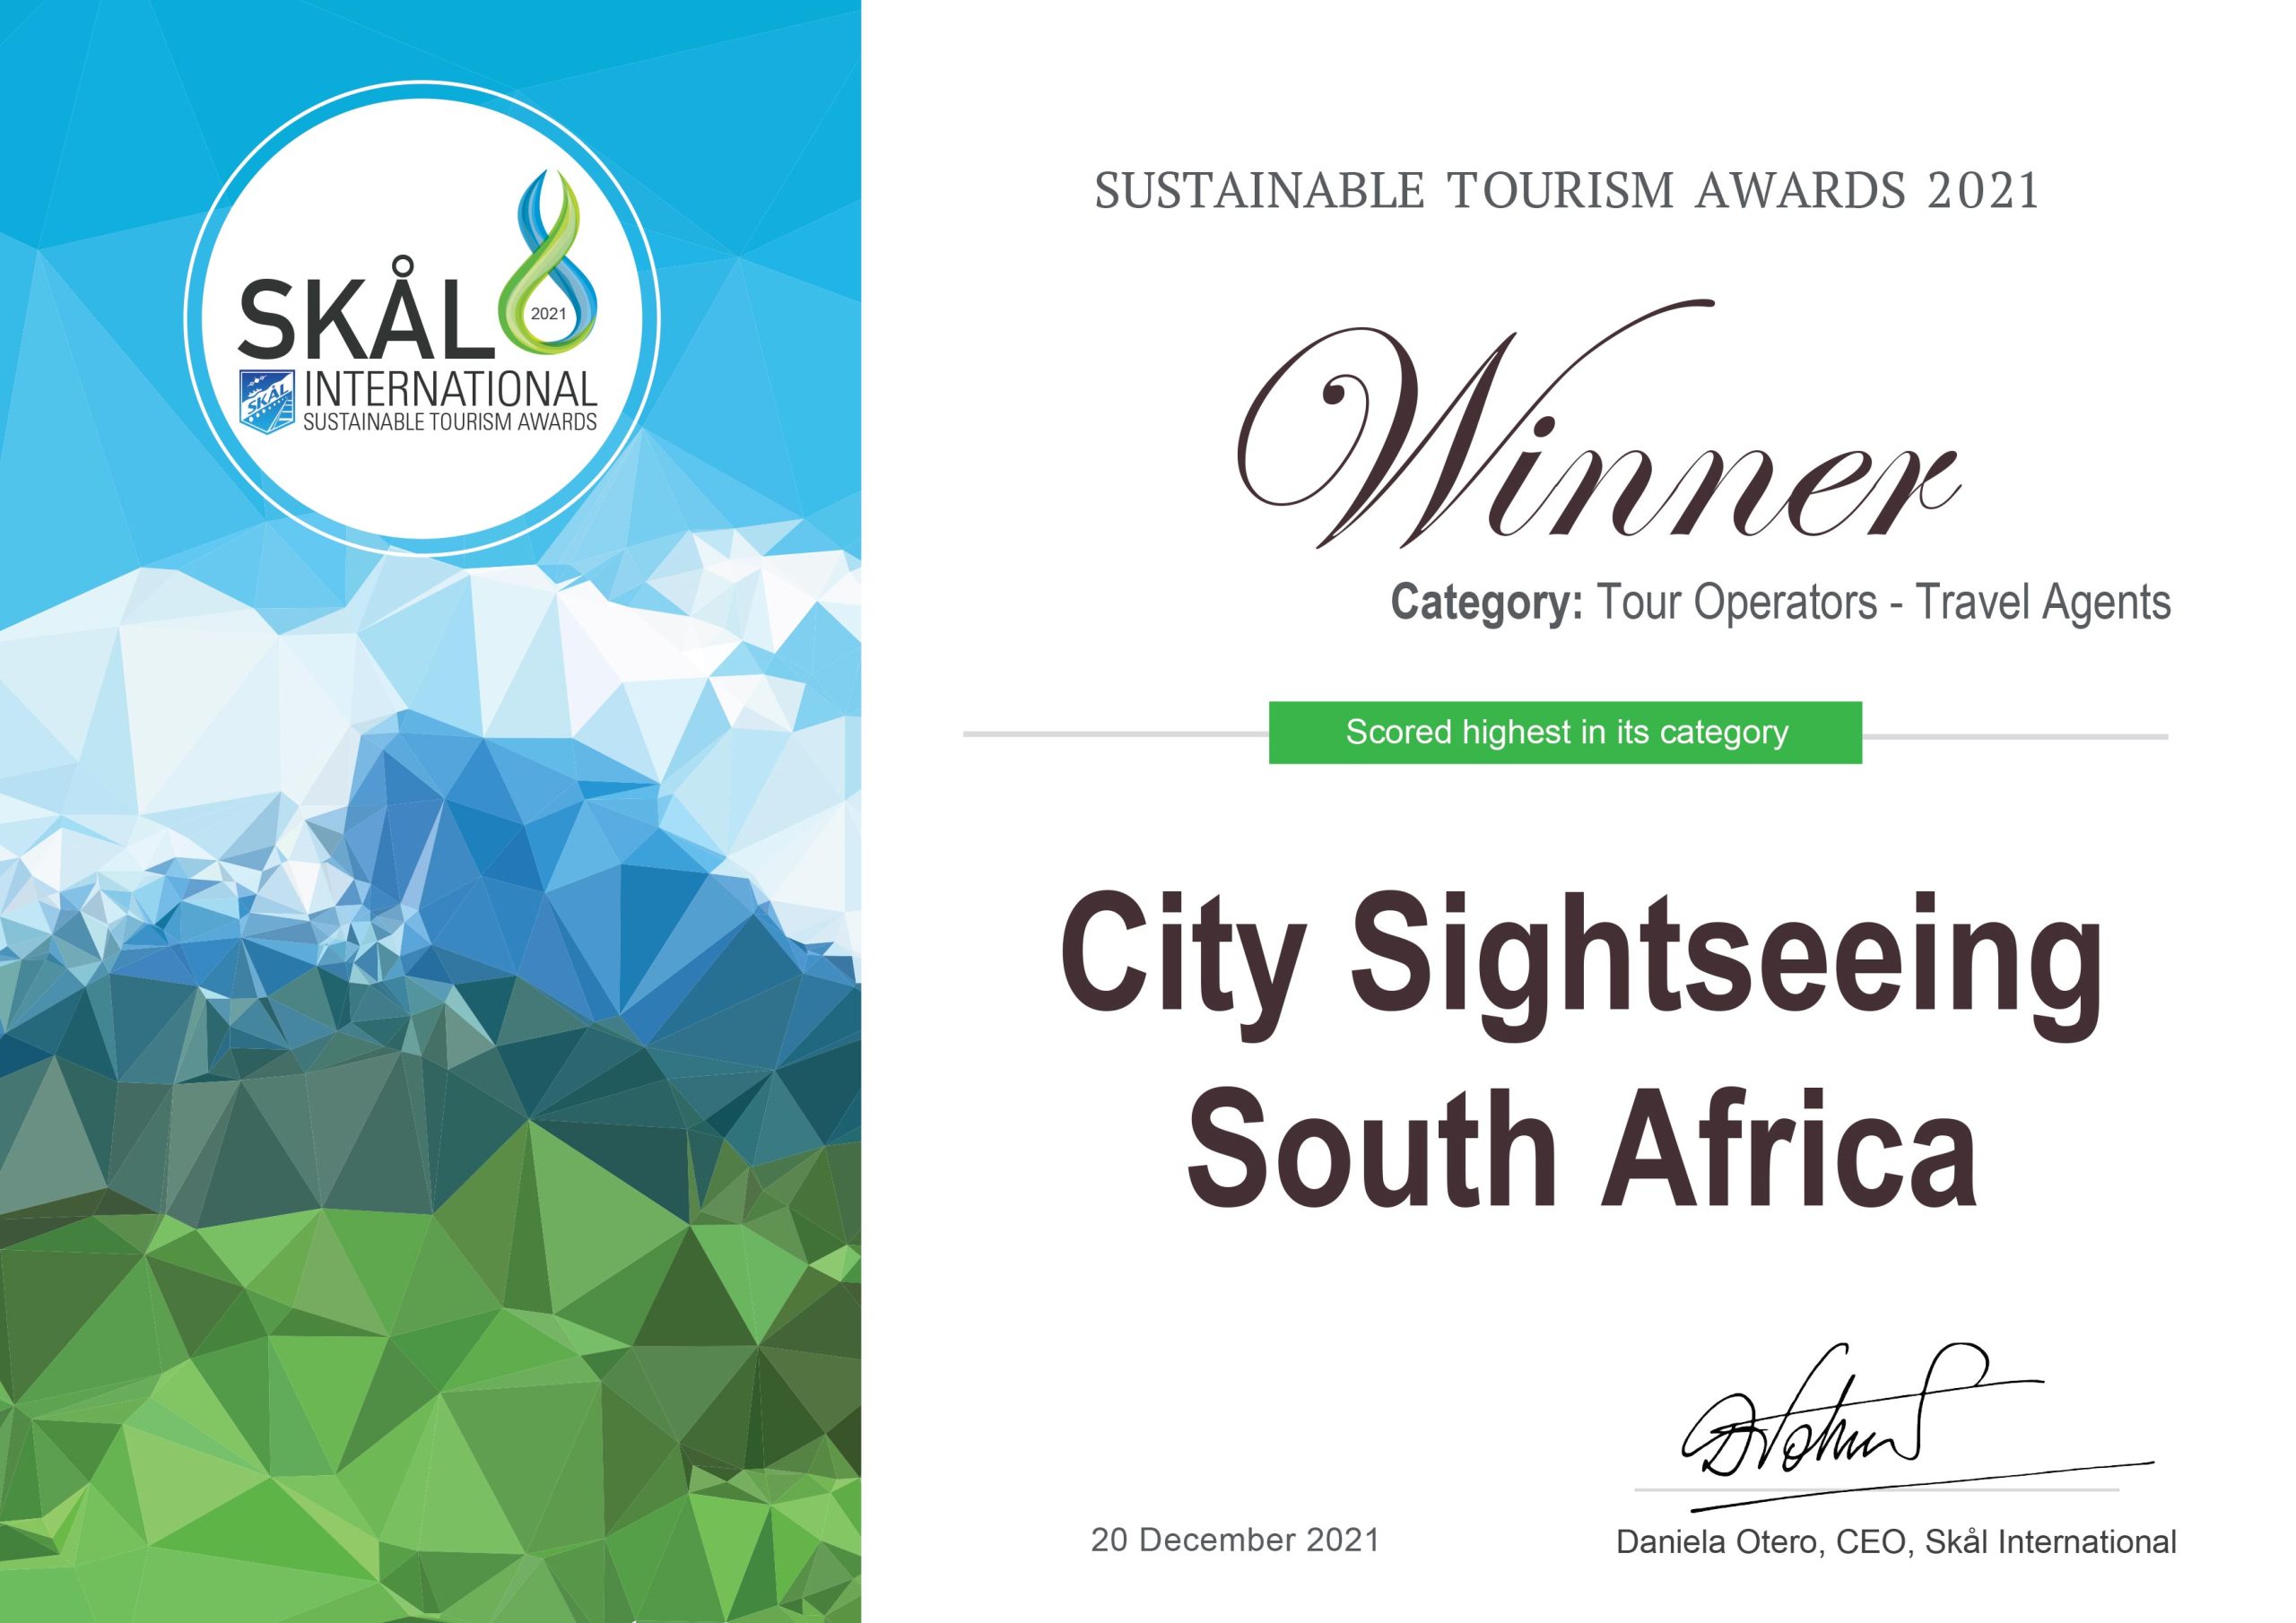 Tour-Operators-and-Travel-Agents_City-Sightseeing-South-Africa